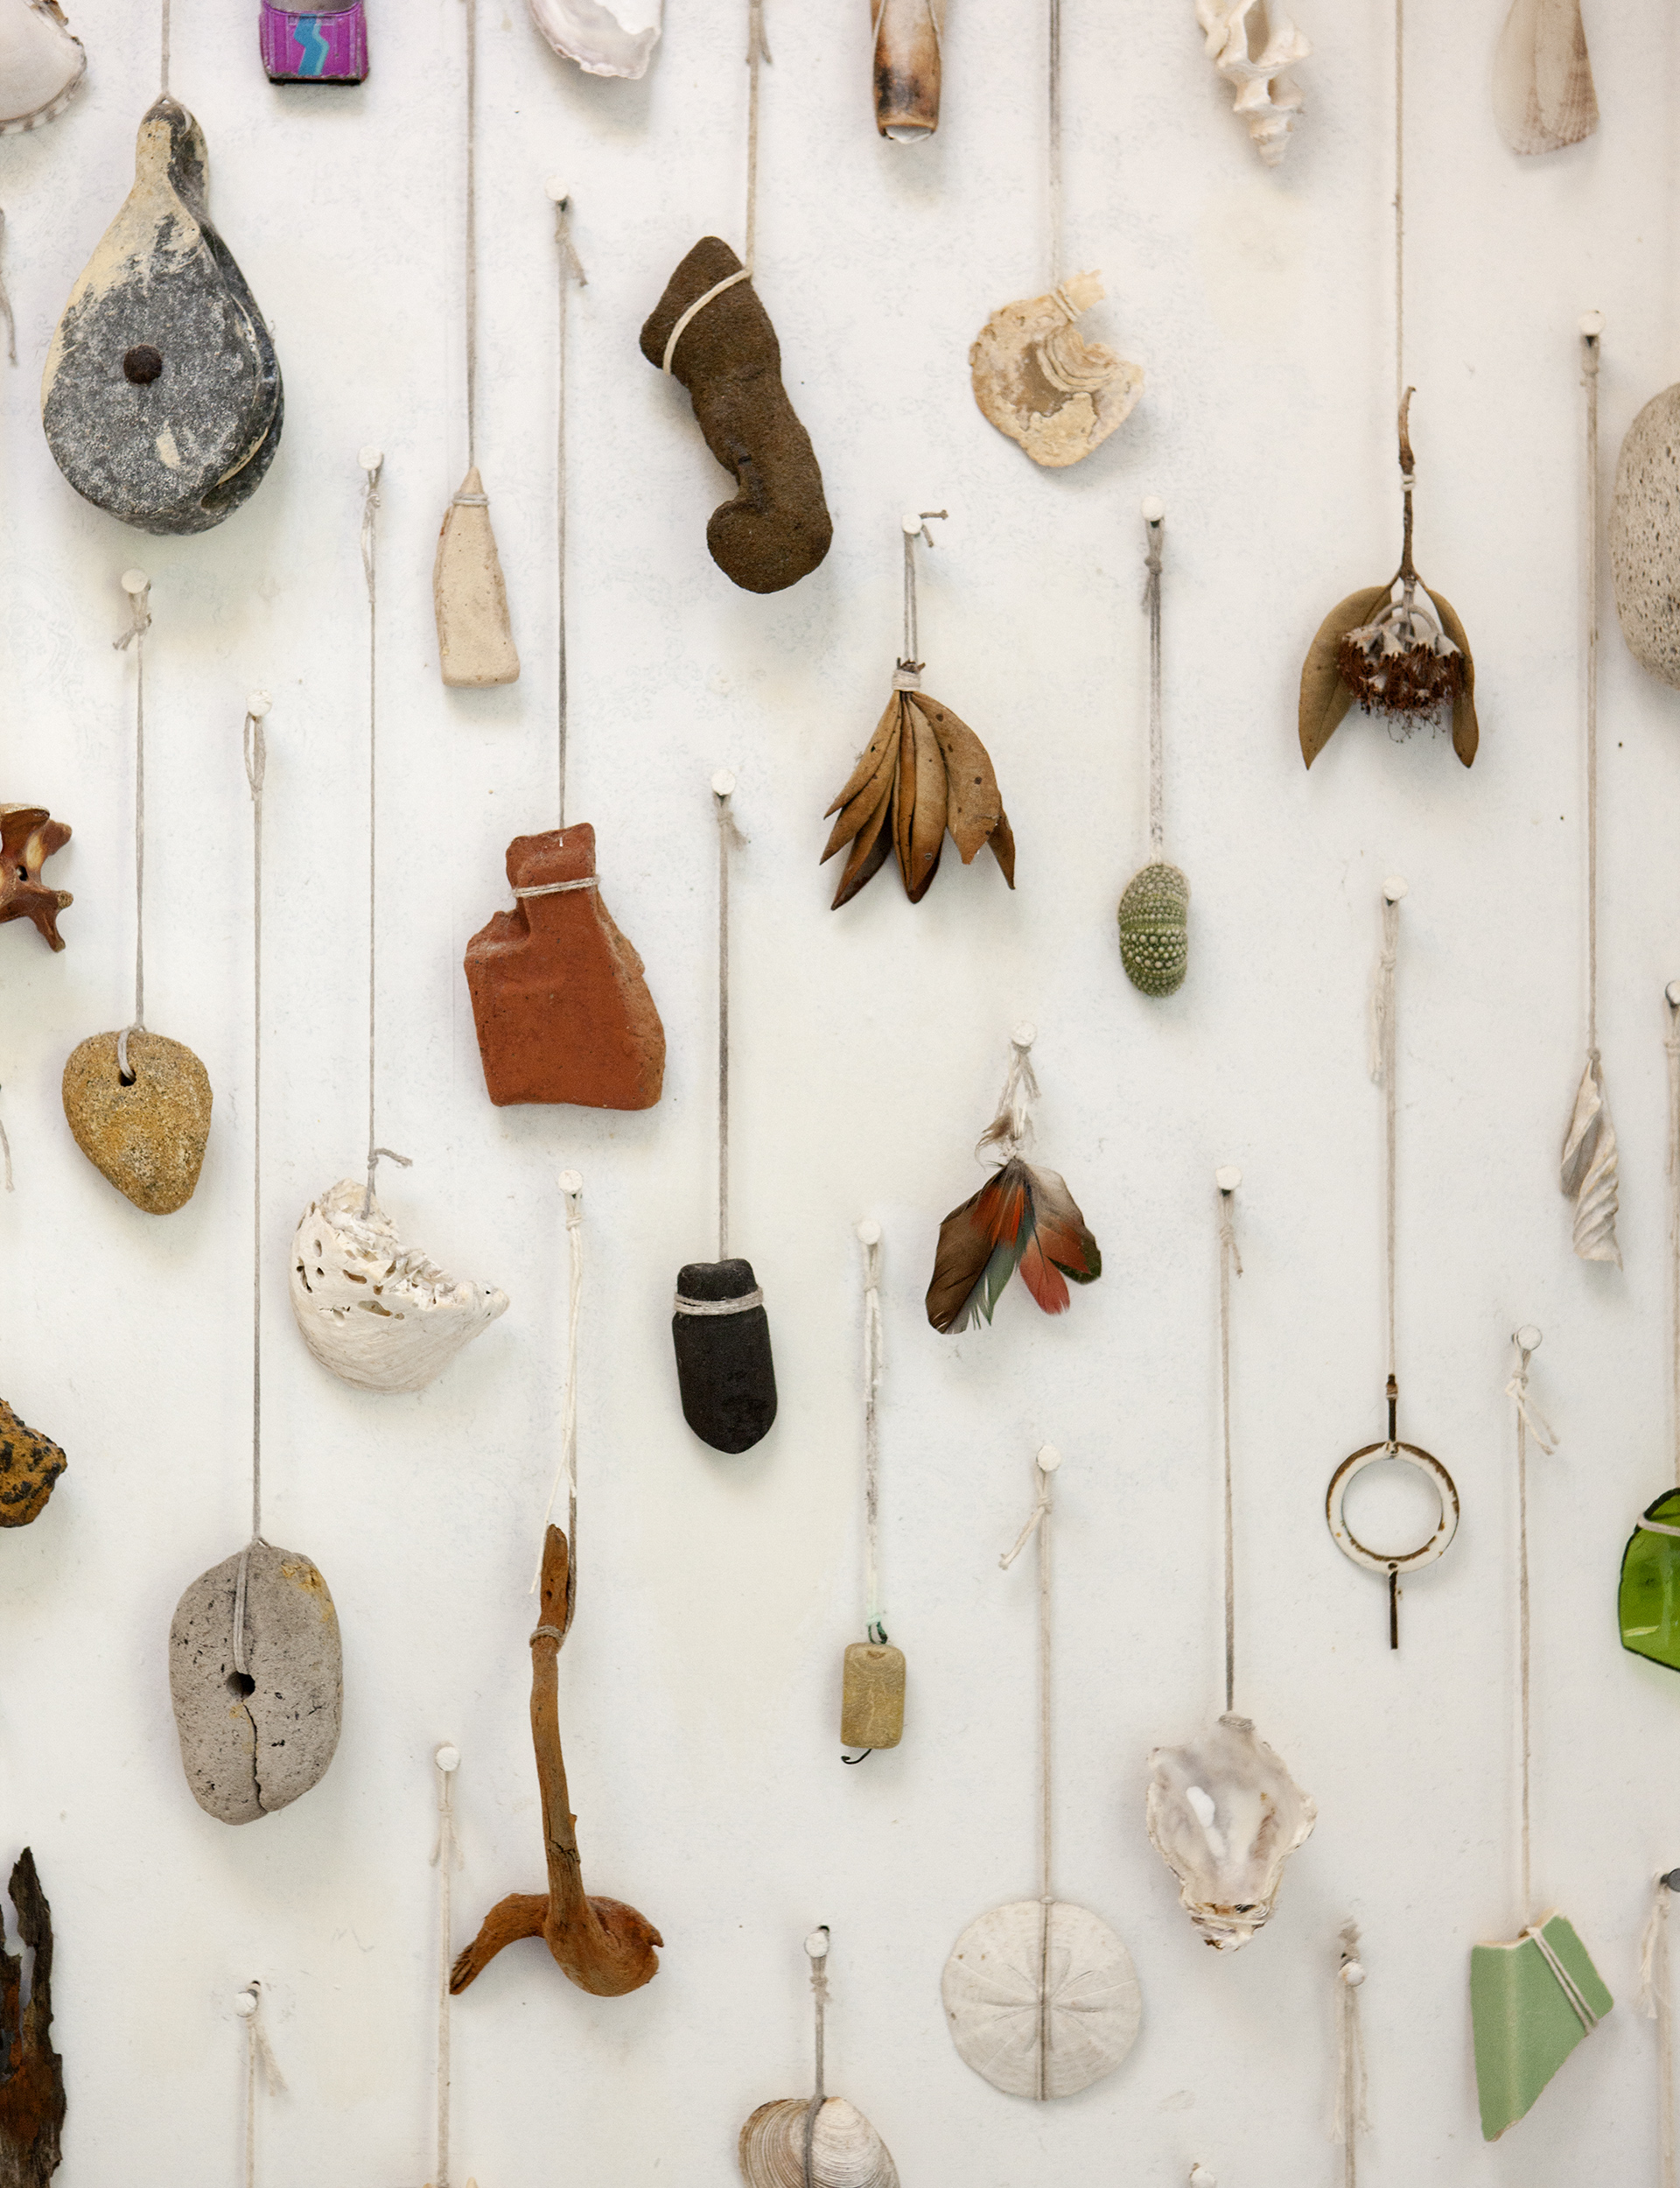 A variety of objects like shells hanging by thread on the wall